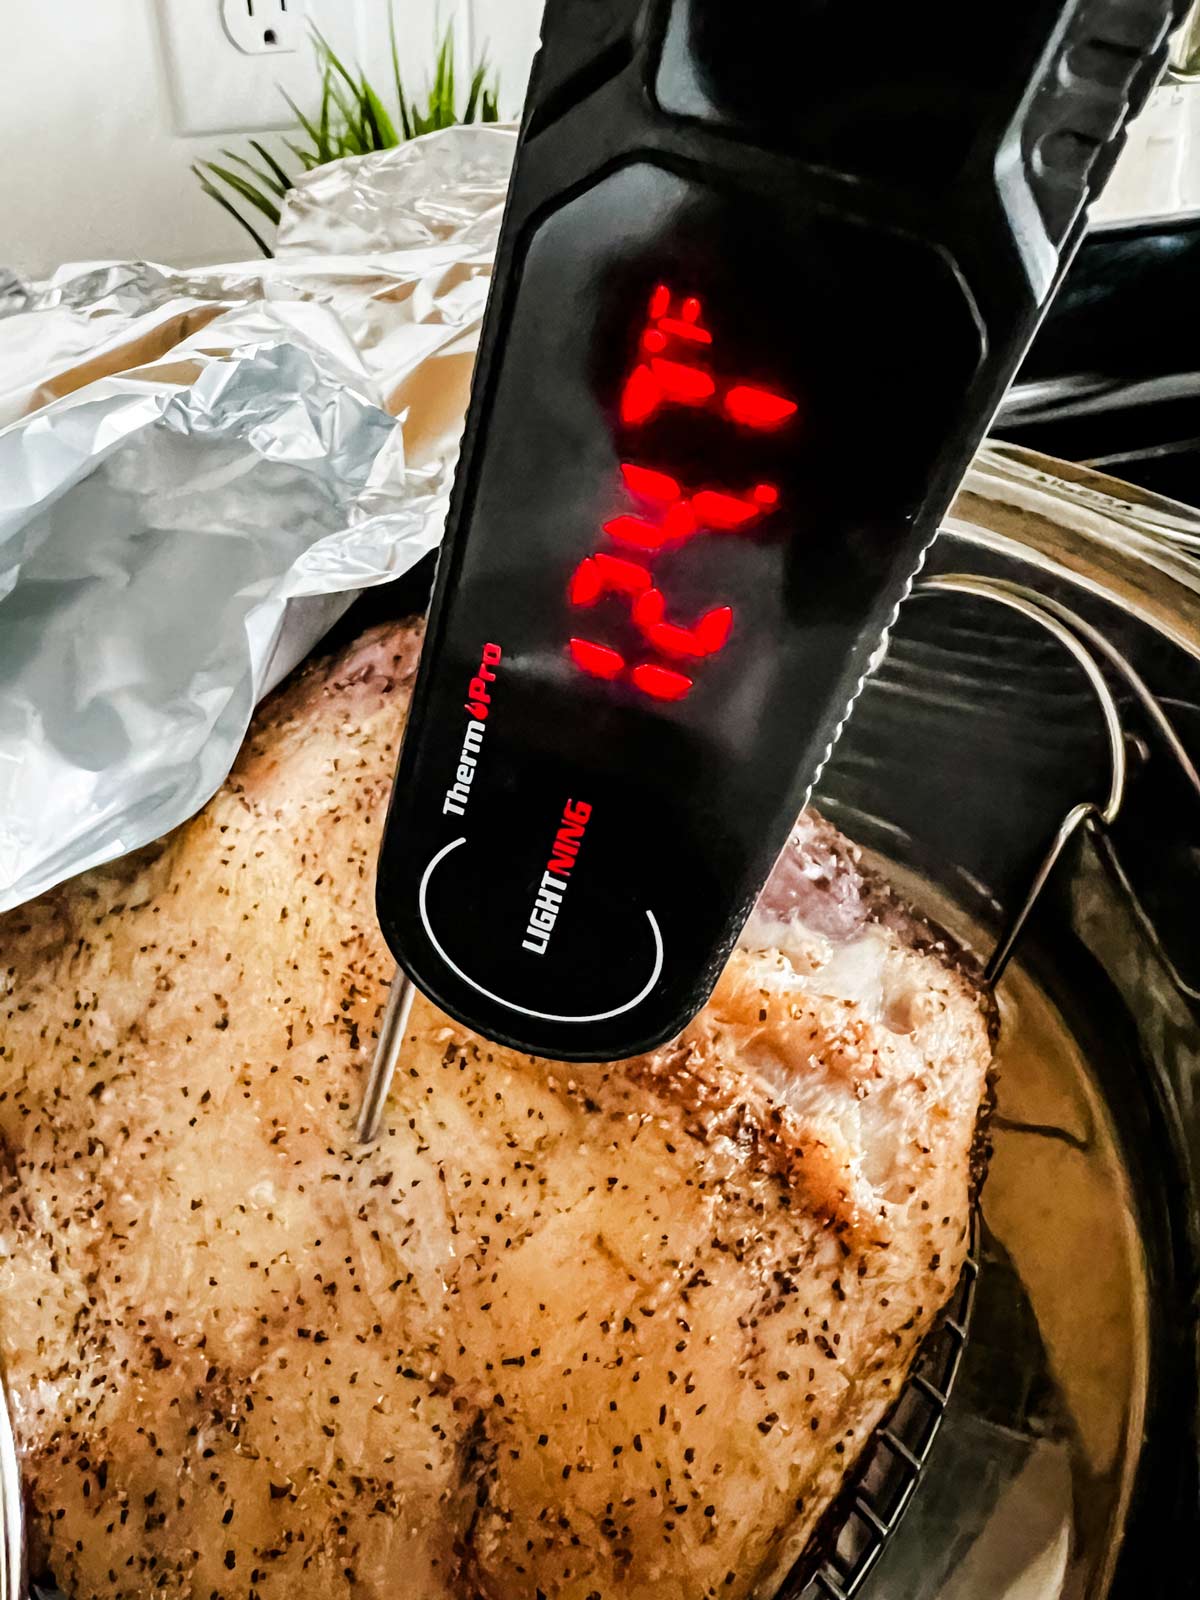 Reverse sear primer ribe that has been slow roasted and has a meat thermometer in it that reads 124.7° F.